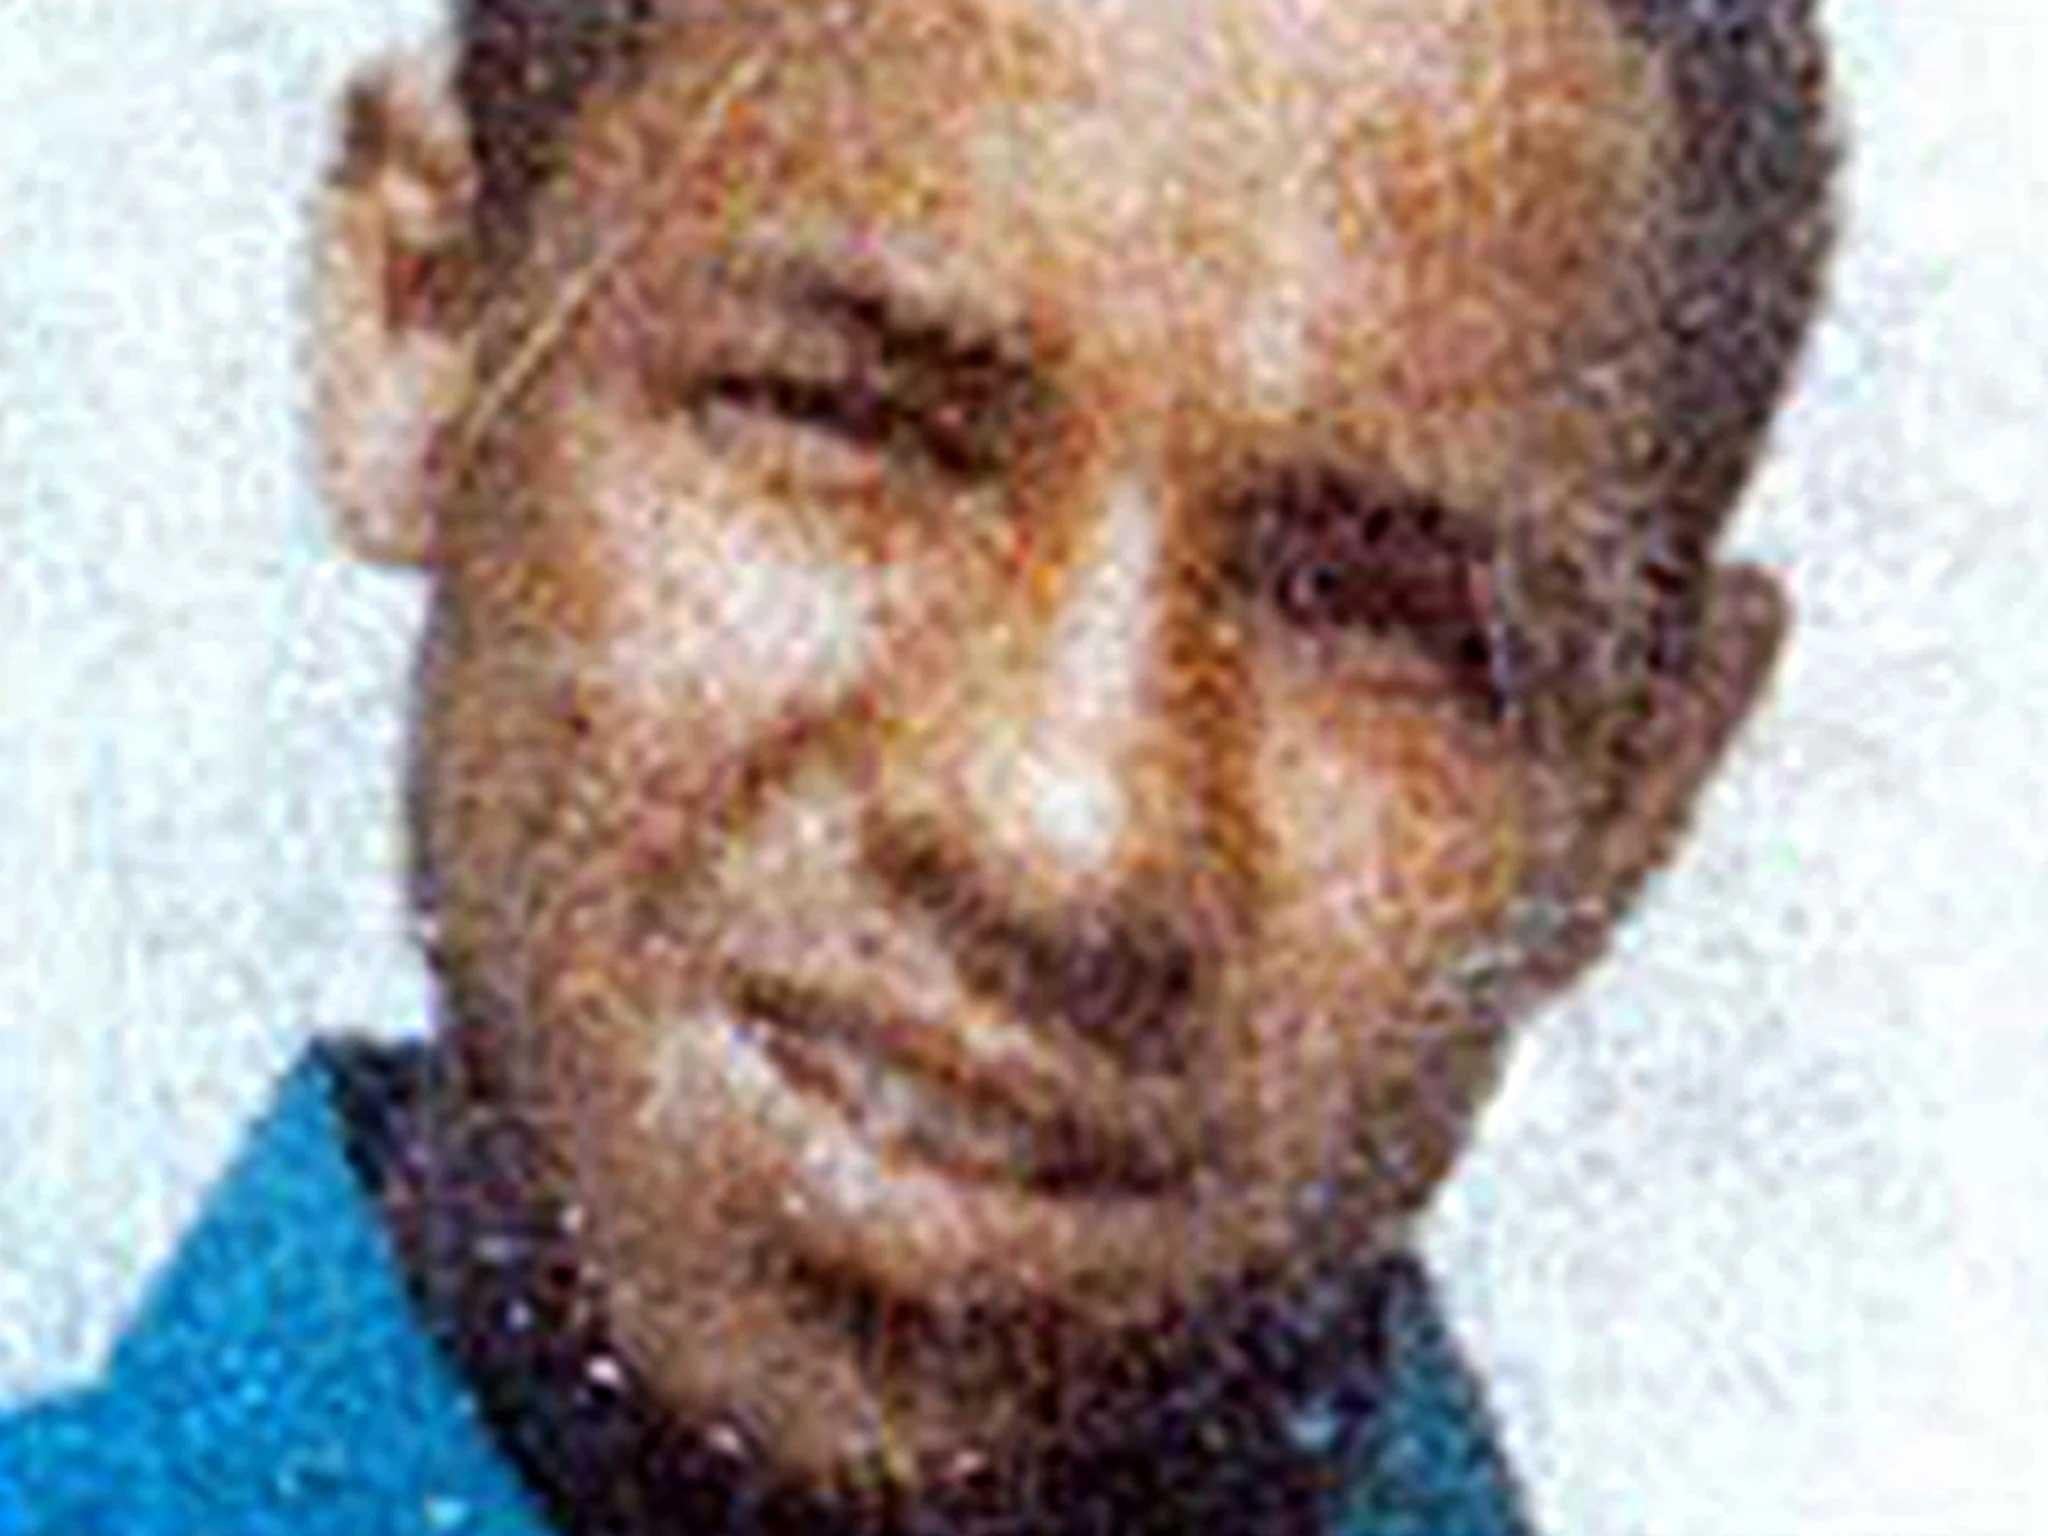 Ahmed Jabbar Kareem Ali, who was 15, died in Basra in May 2003 after he was detained on suspicion of looting